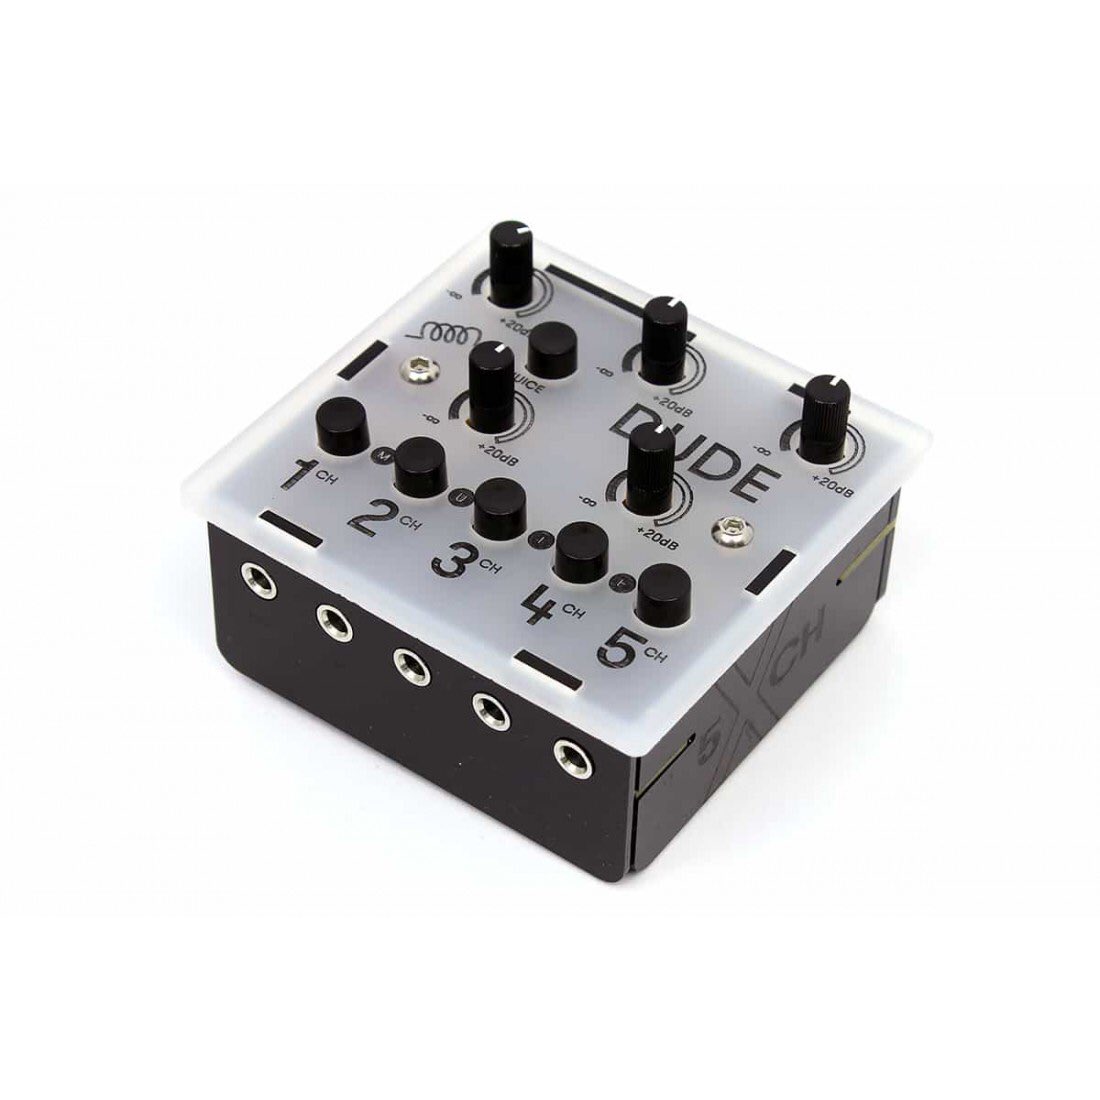 So what if i want to play my Volca Drum, Volca Modular, Korg EA-1 + my Critter & Guitari Pocket Piano, all at the same time while recording or jamming live? How will I manage all these rascally mono signals?? i hope to eventually answer this question with “the Bastl Dude mixer”.